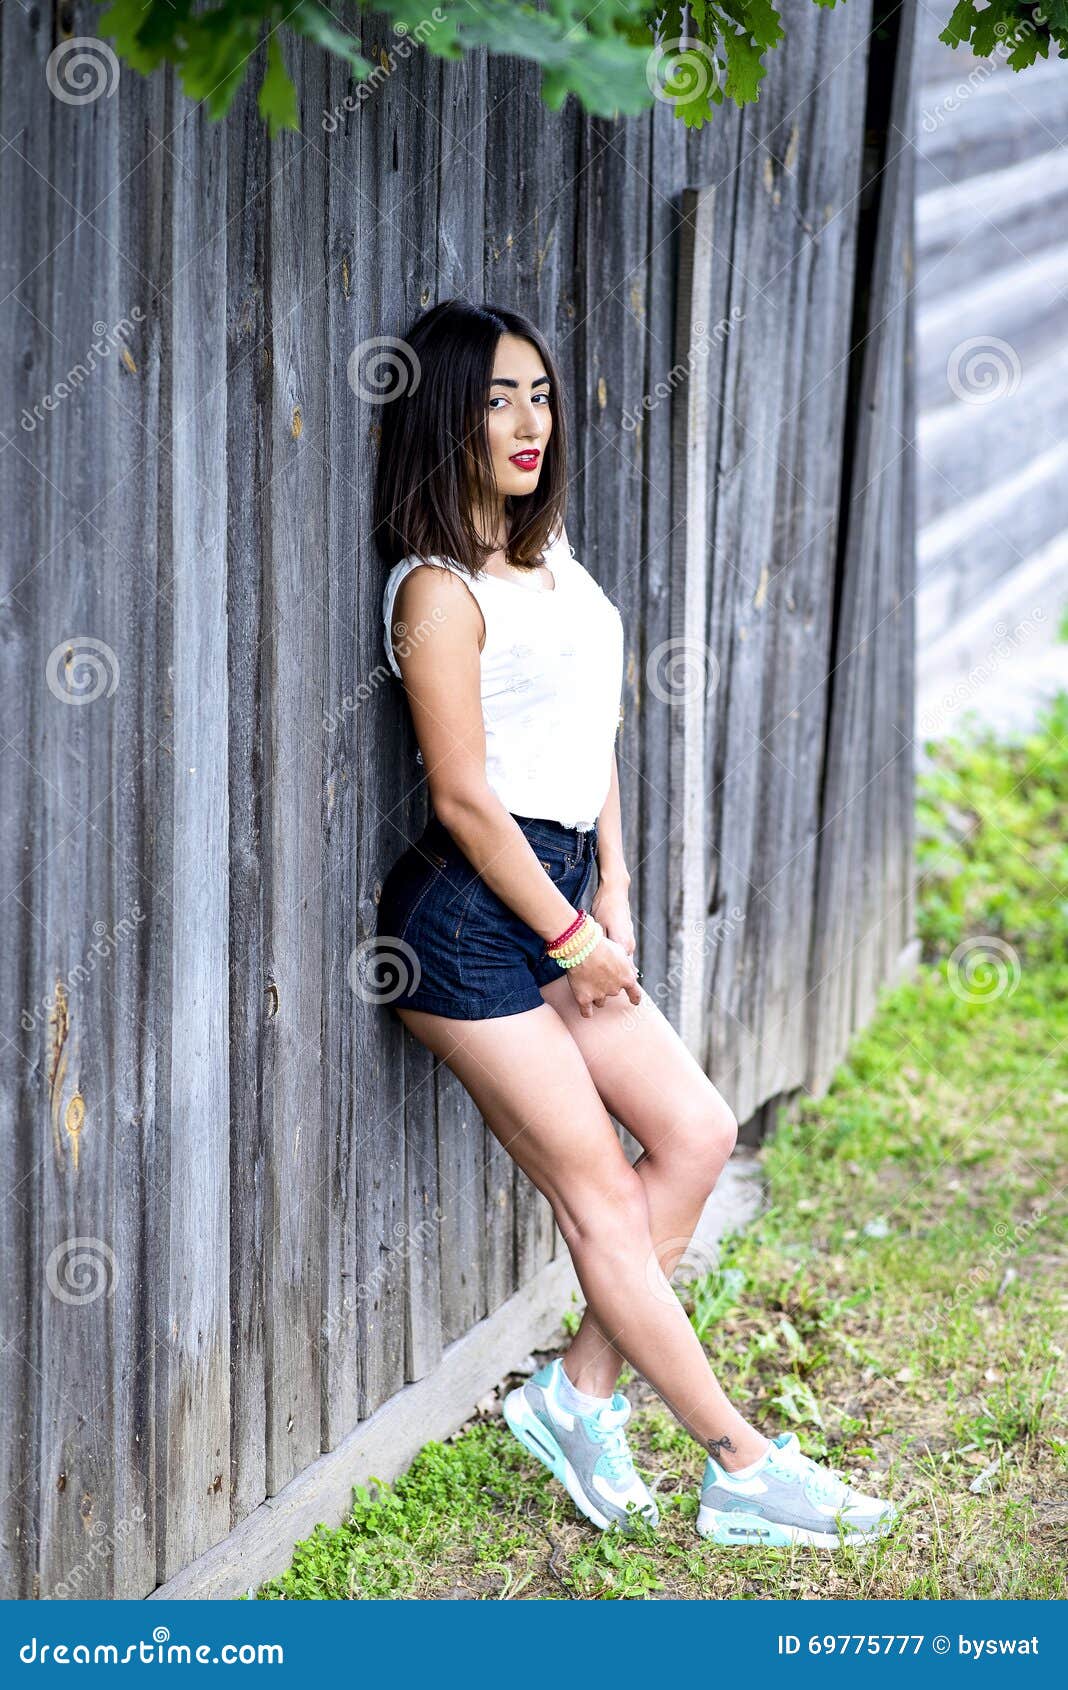 Beautiful Girl Standing at the Fence Style Fashion Woman Summer Outdoor ...